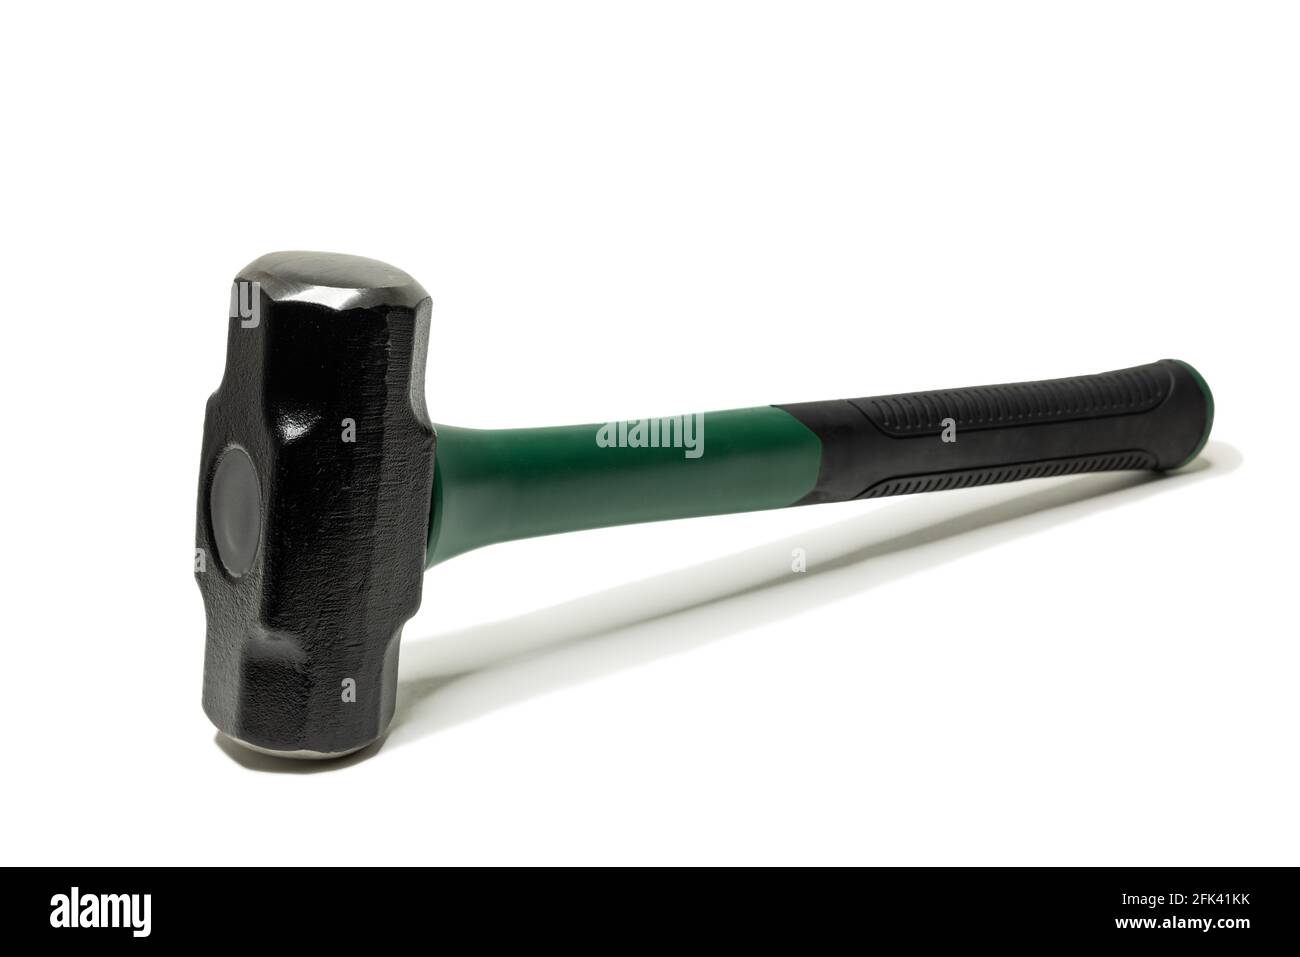 Sledgehammer with a green and black handle. Stock Photo